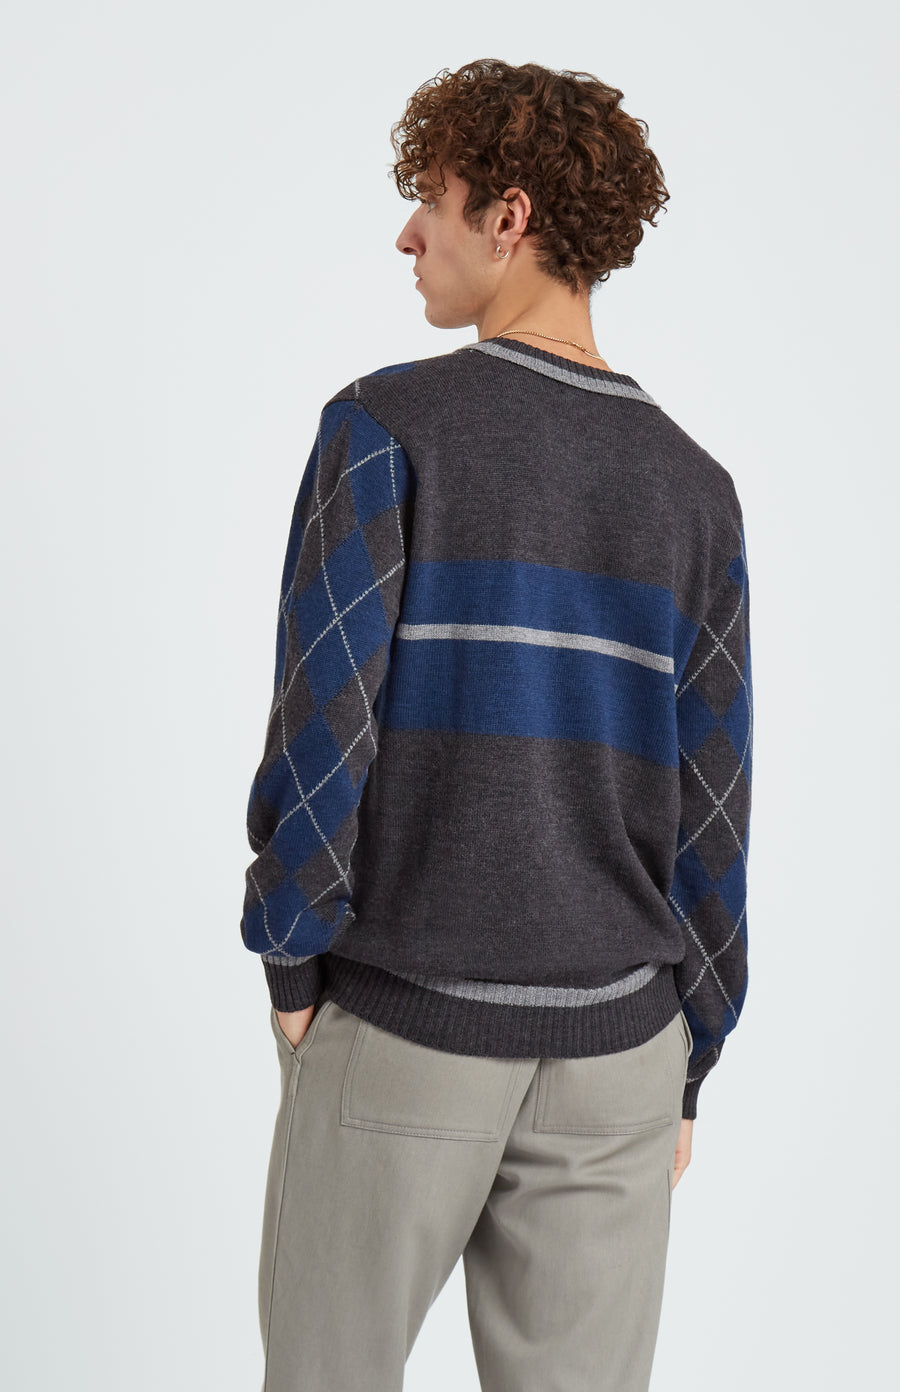 Pringle of Scotland Men's Argyle Merino Jumper In Charcoal And Flannel rear view